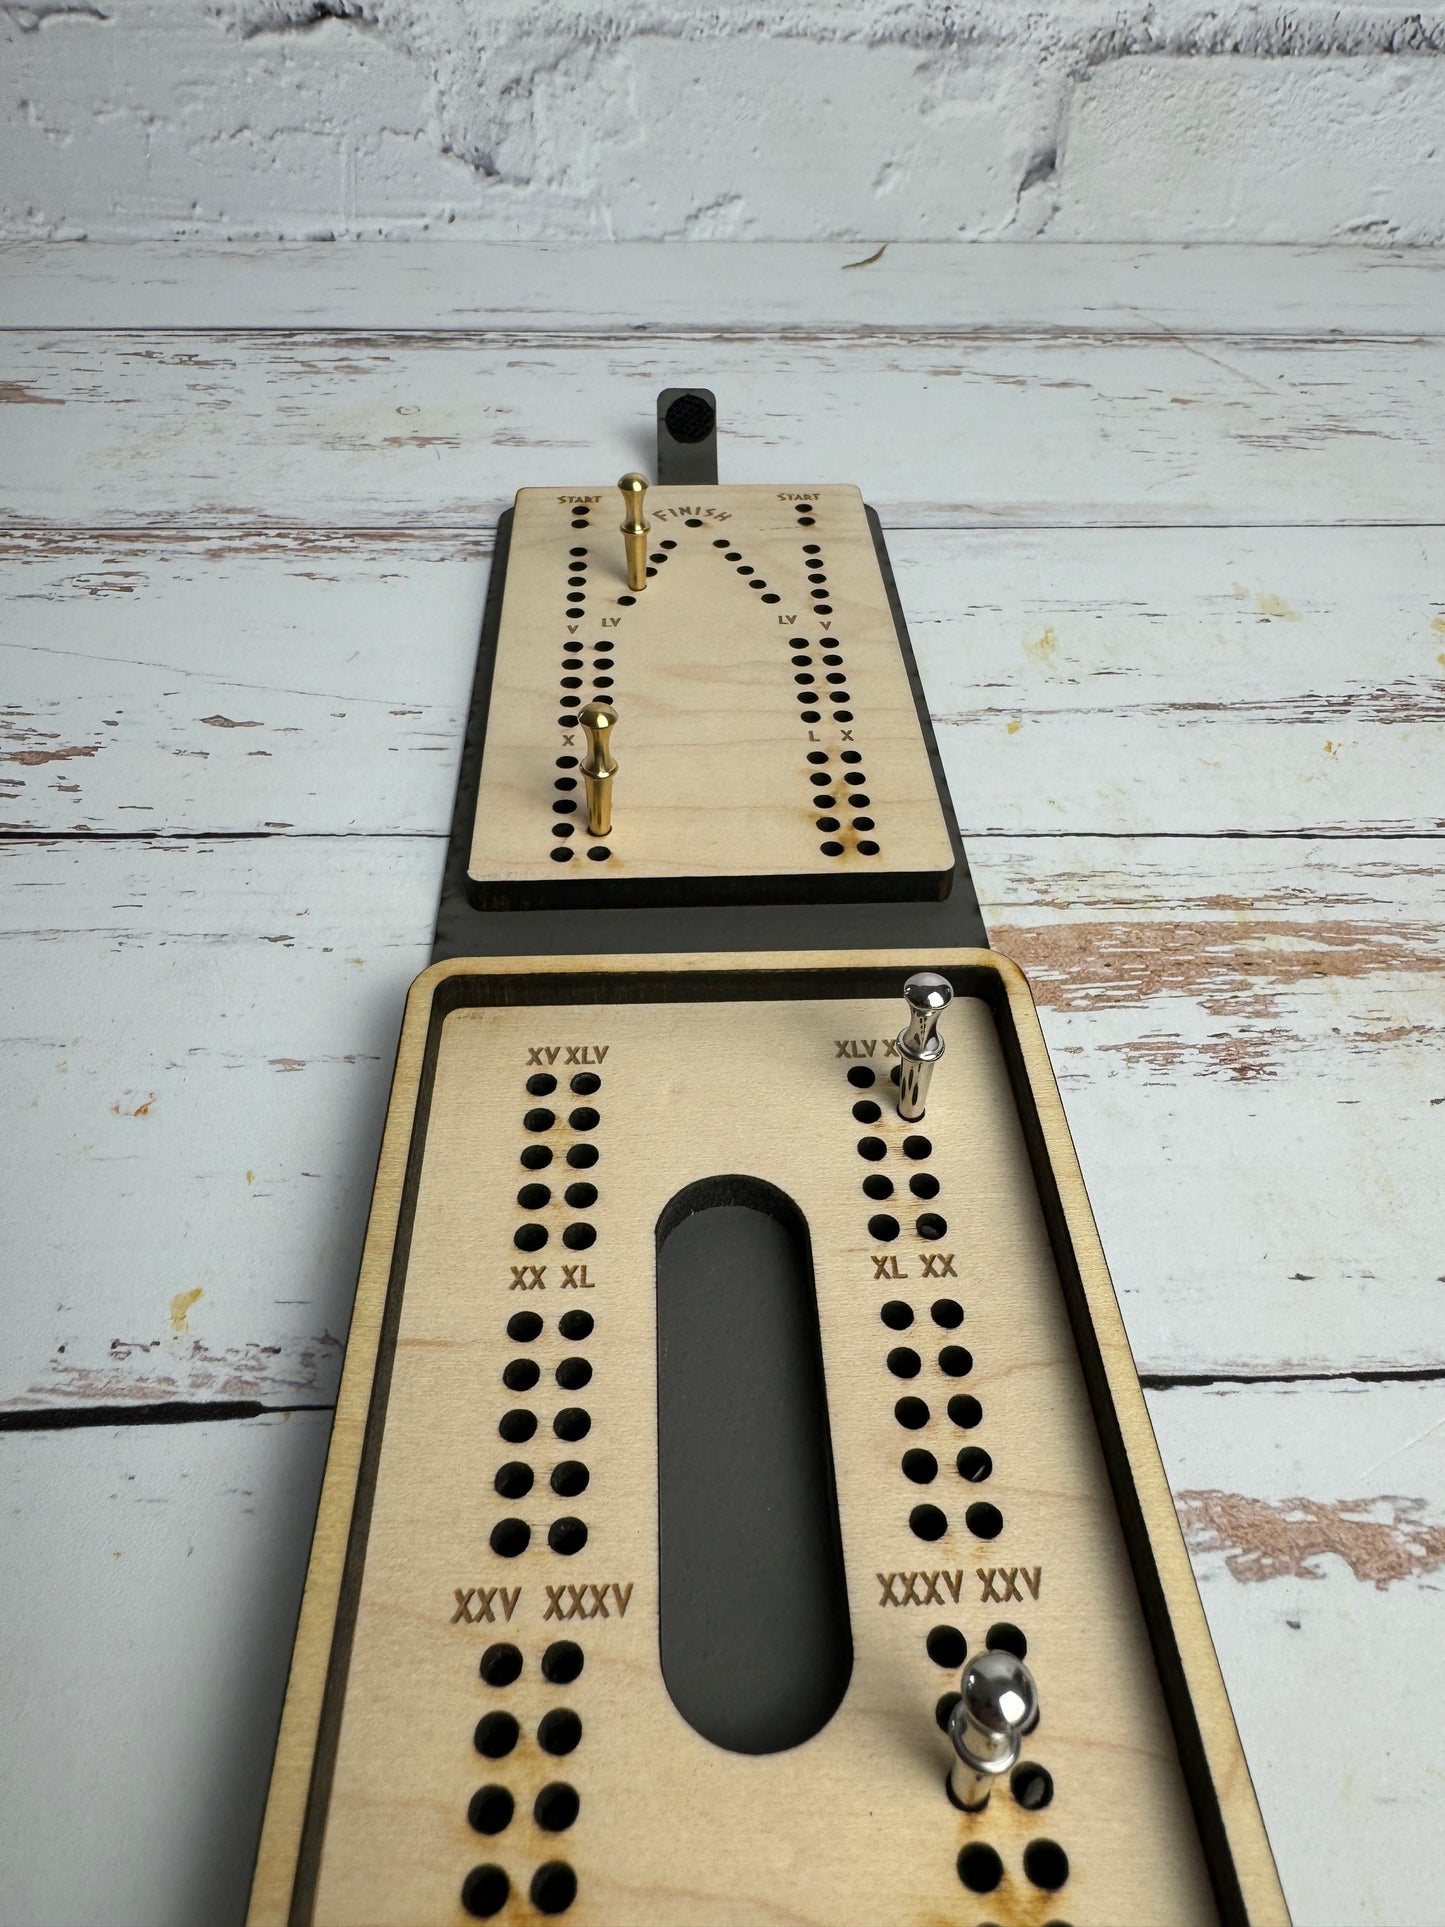 Folding Cribbage Board - Dolphins